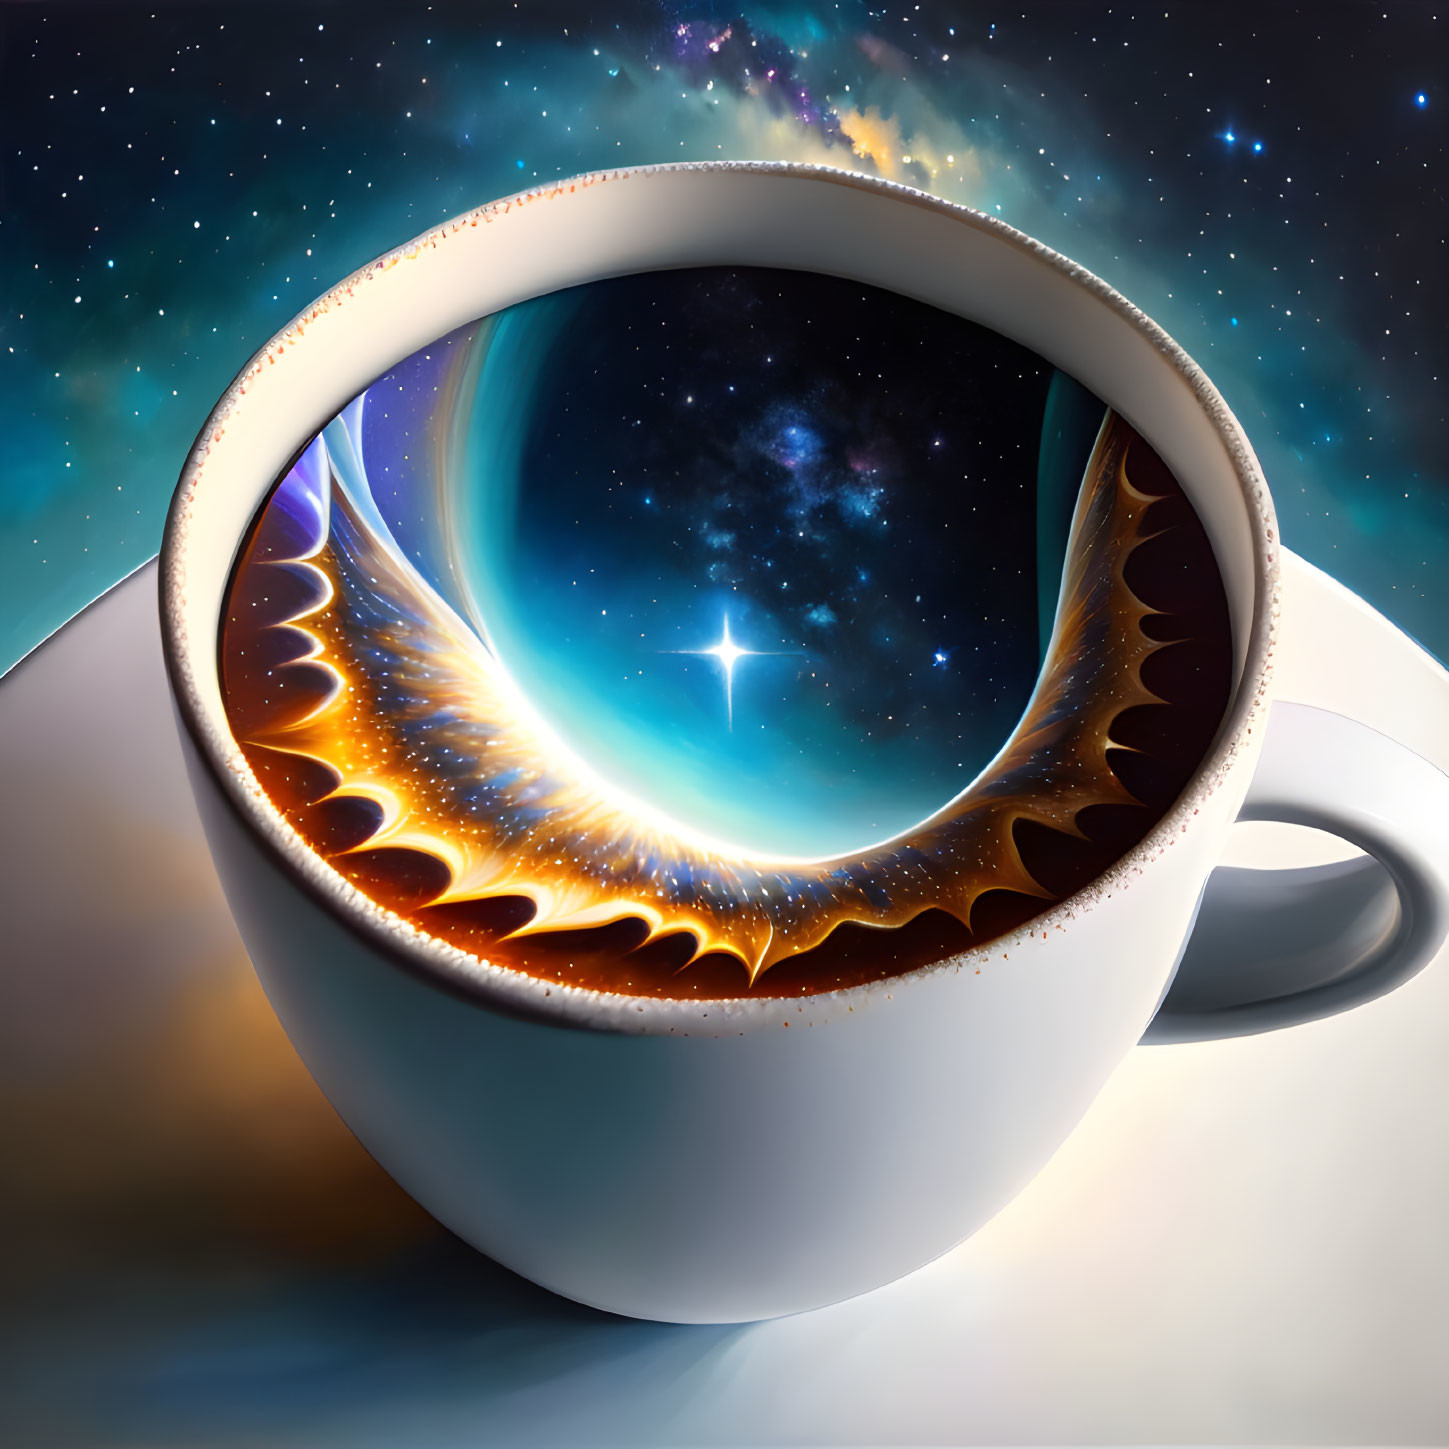 Vibrant galaxy and celestial colors in coffee cup scene